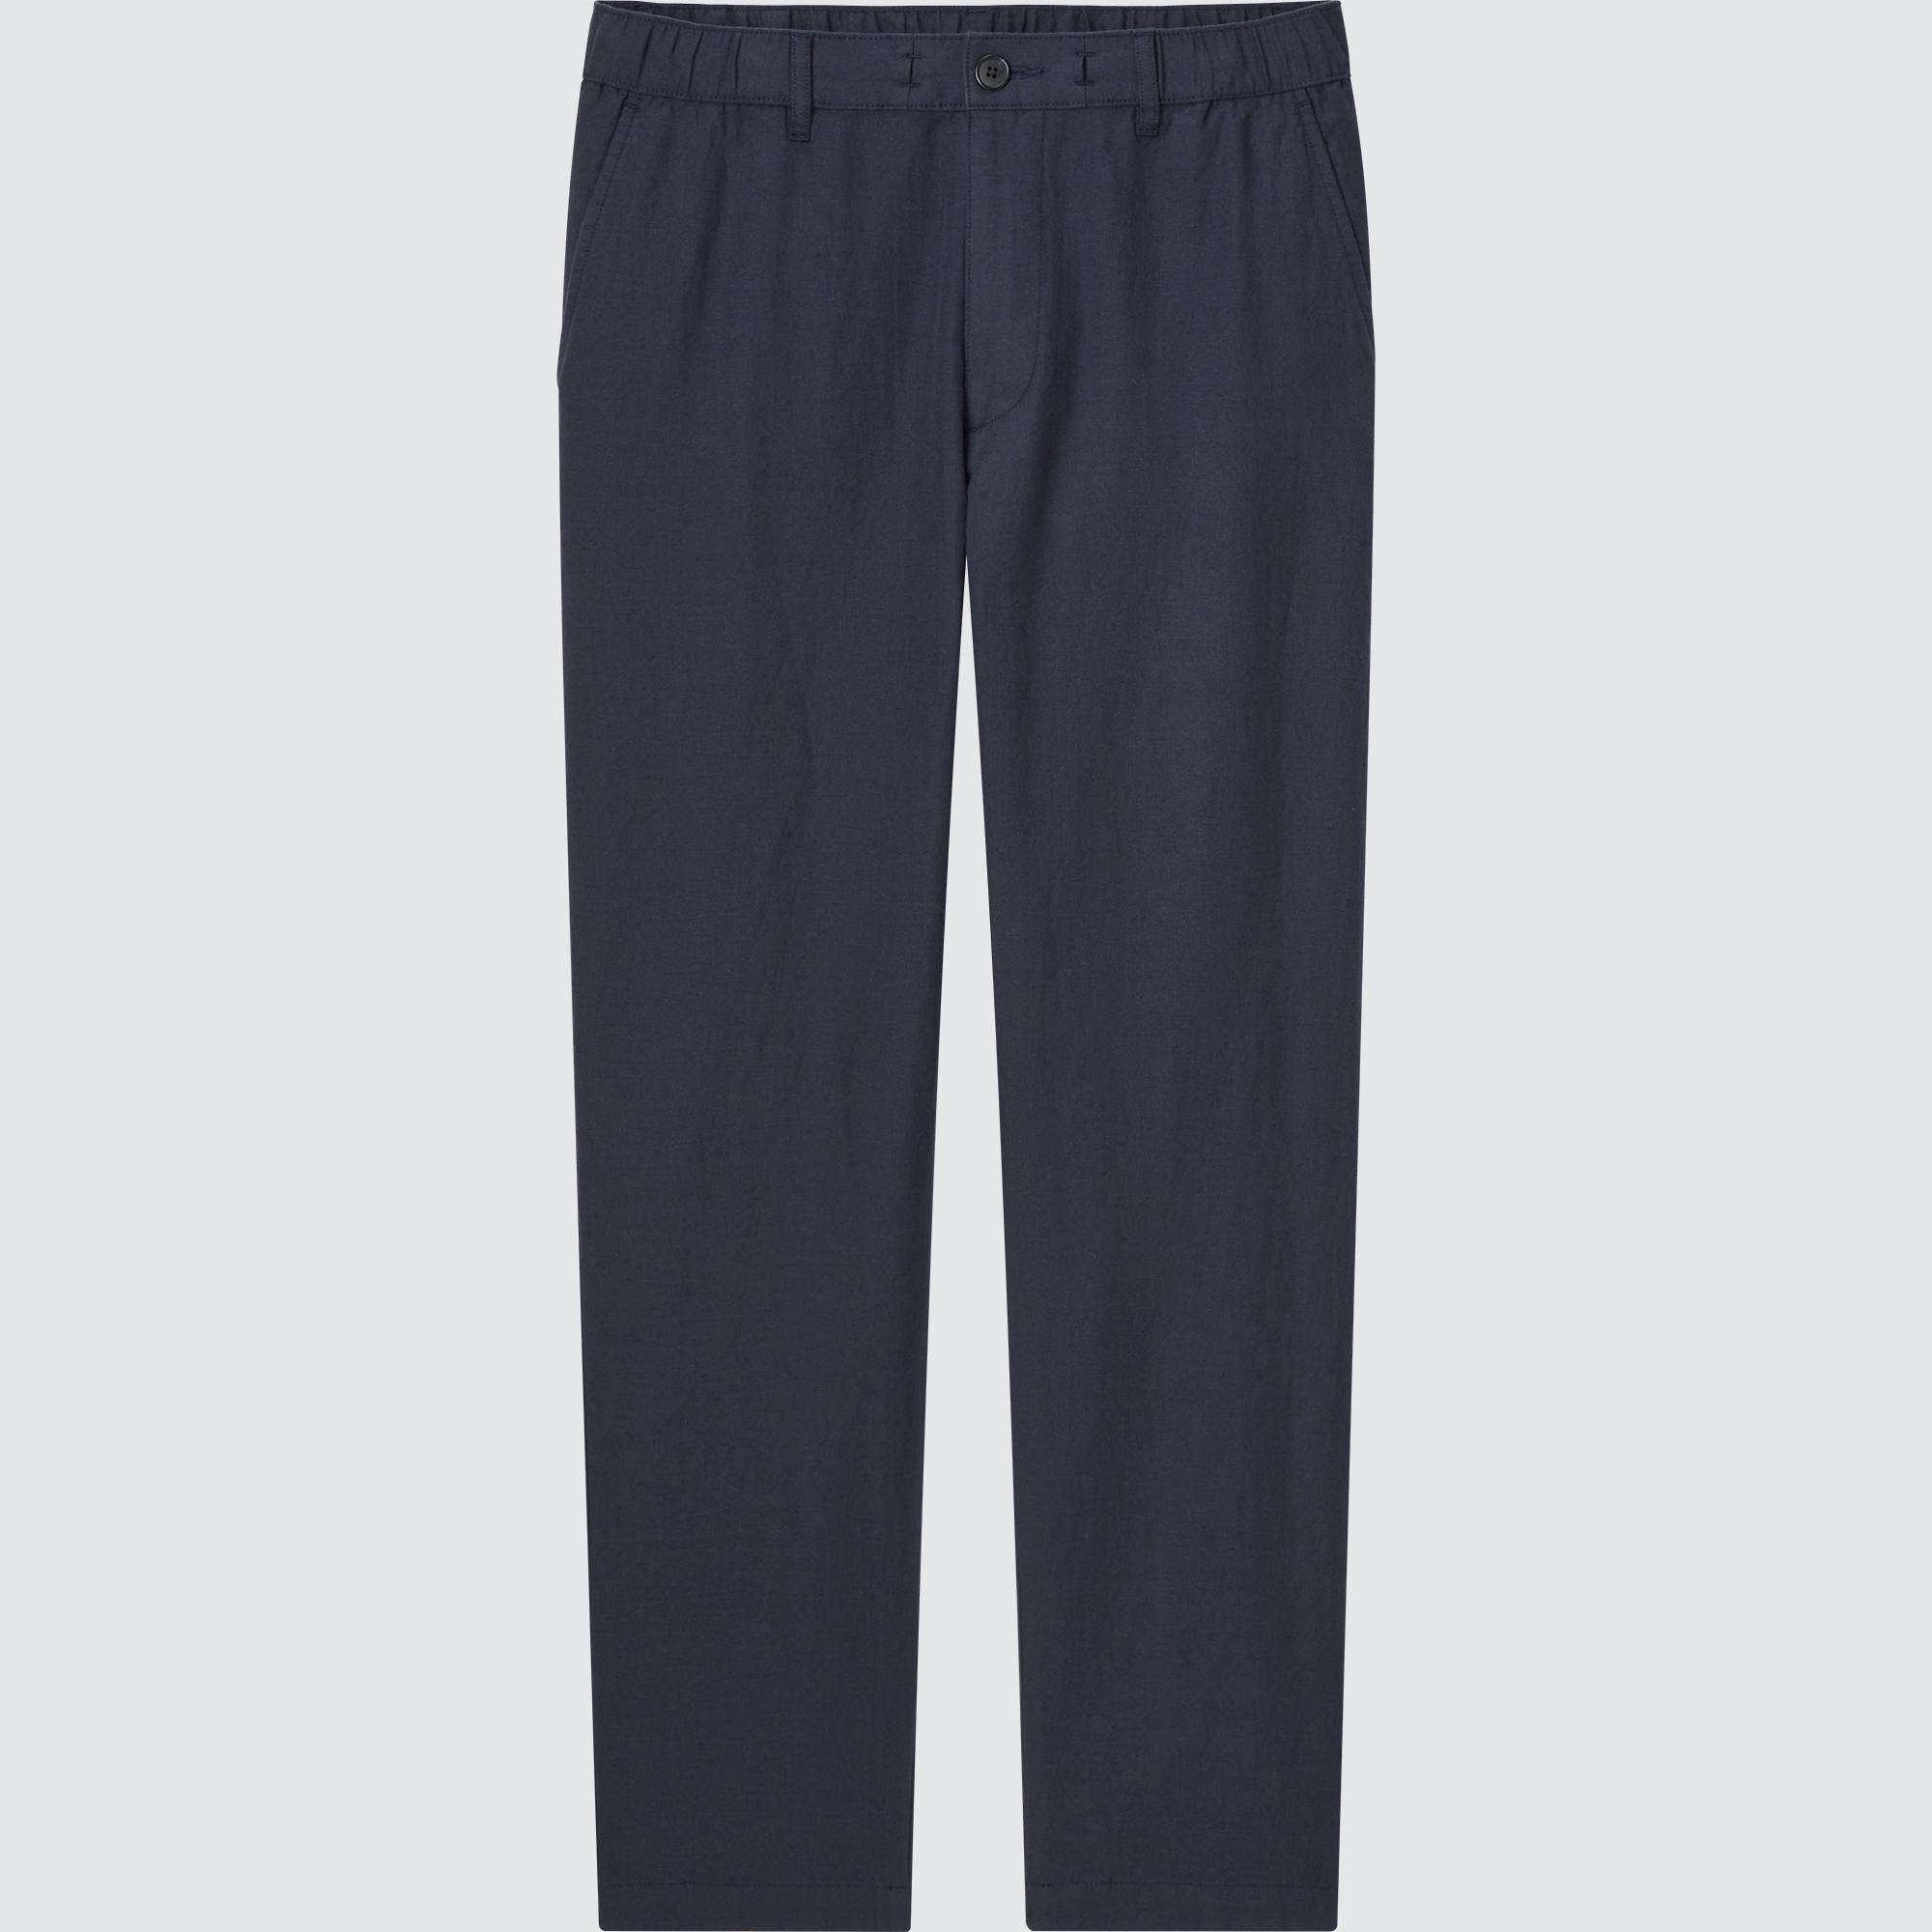 Fitting Room Review Uniqlo Cotton Linen Pants  Welcome Objects